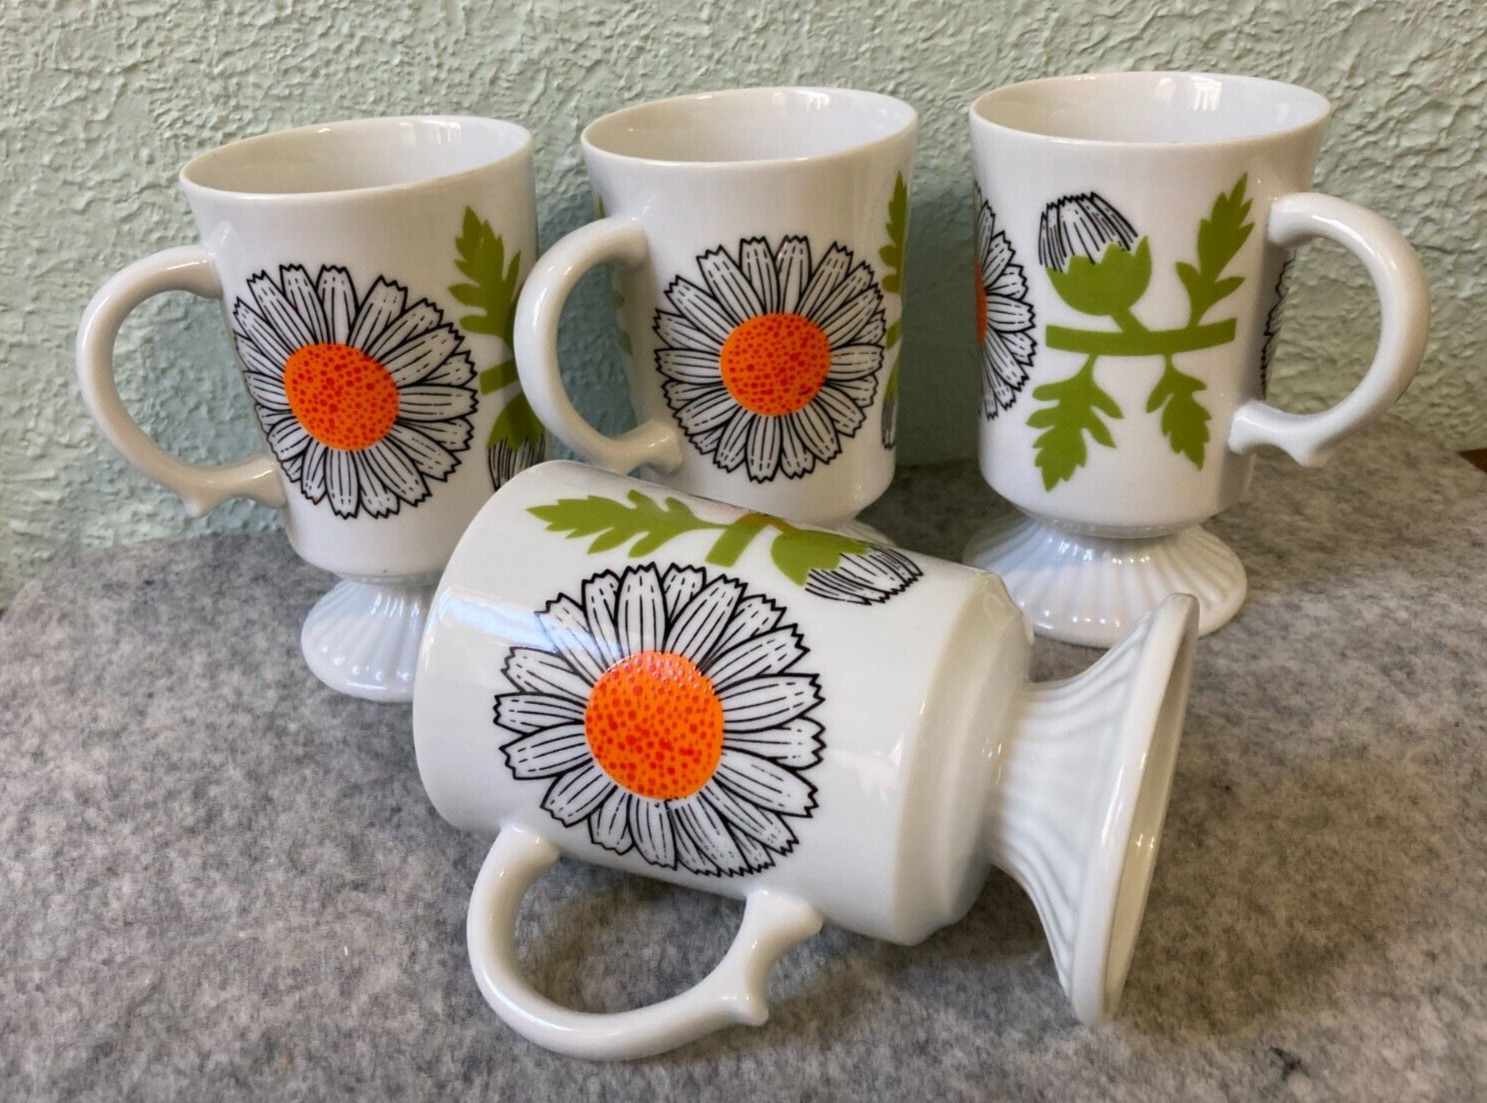 Hippie Era Big Daisy Flower Footed Coffee Cups Mugs Made in Japan Qty 4 Vintage